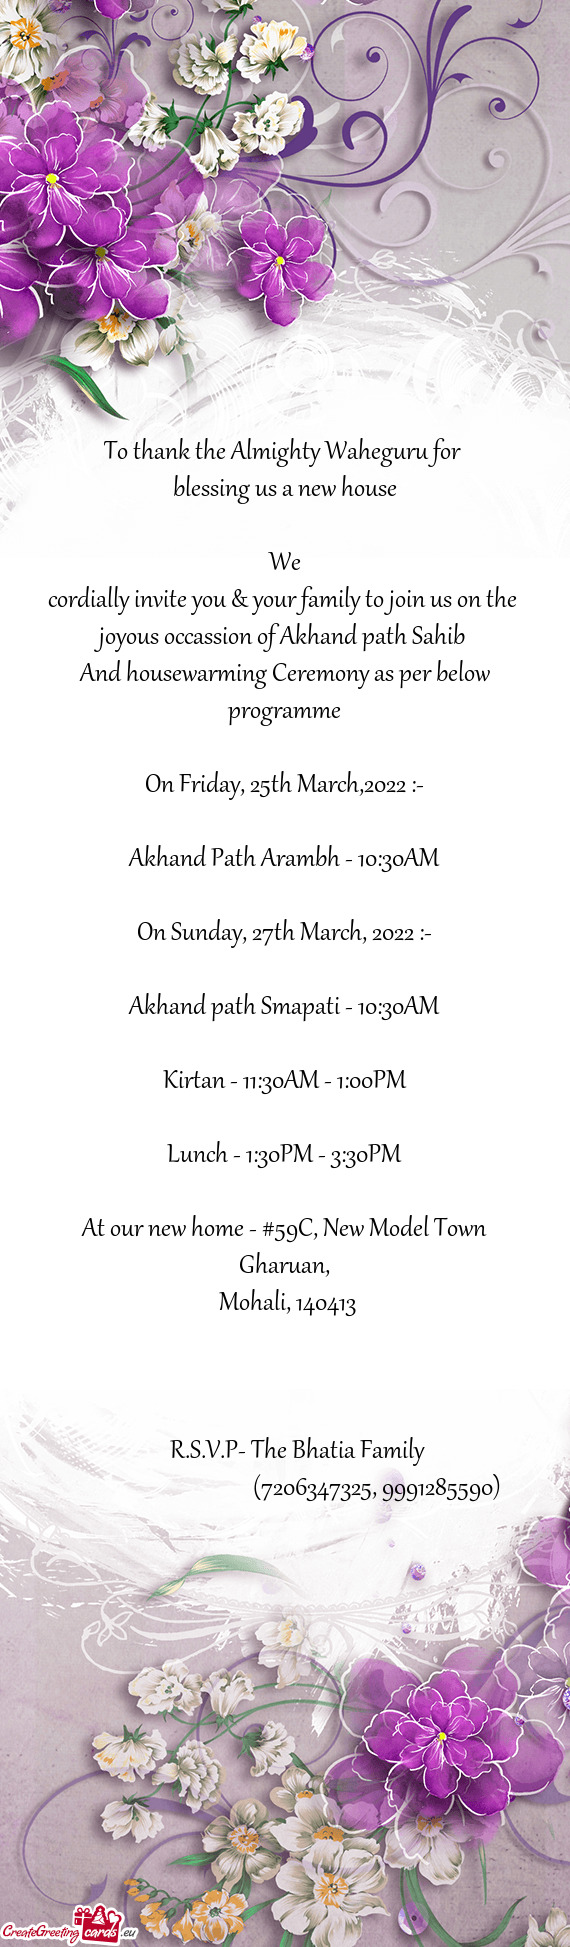 And housewarming Ceremony as per below programme